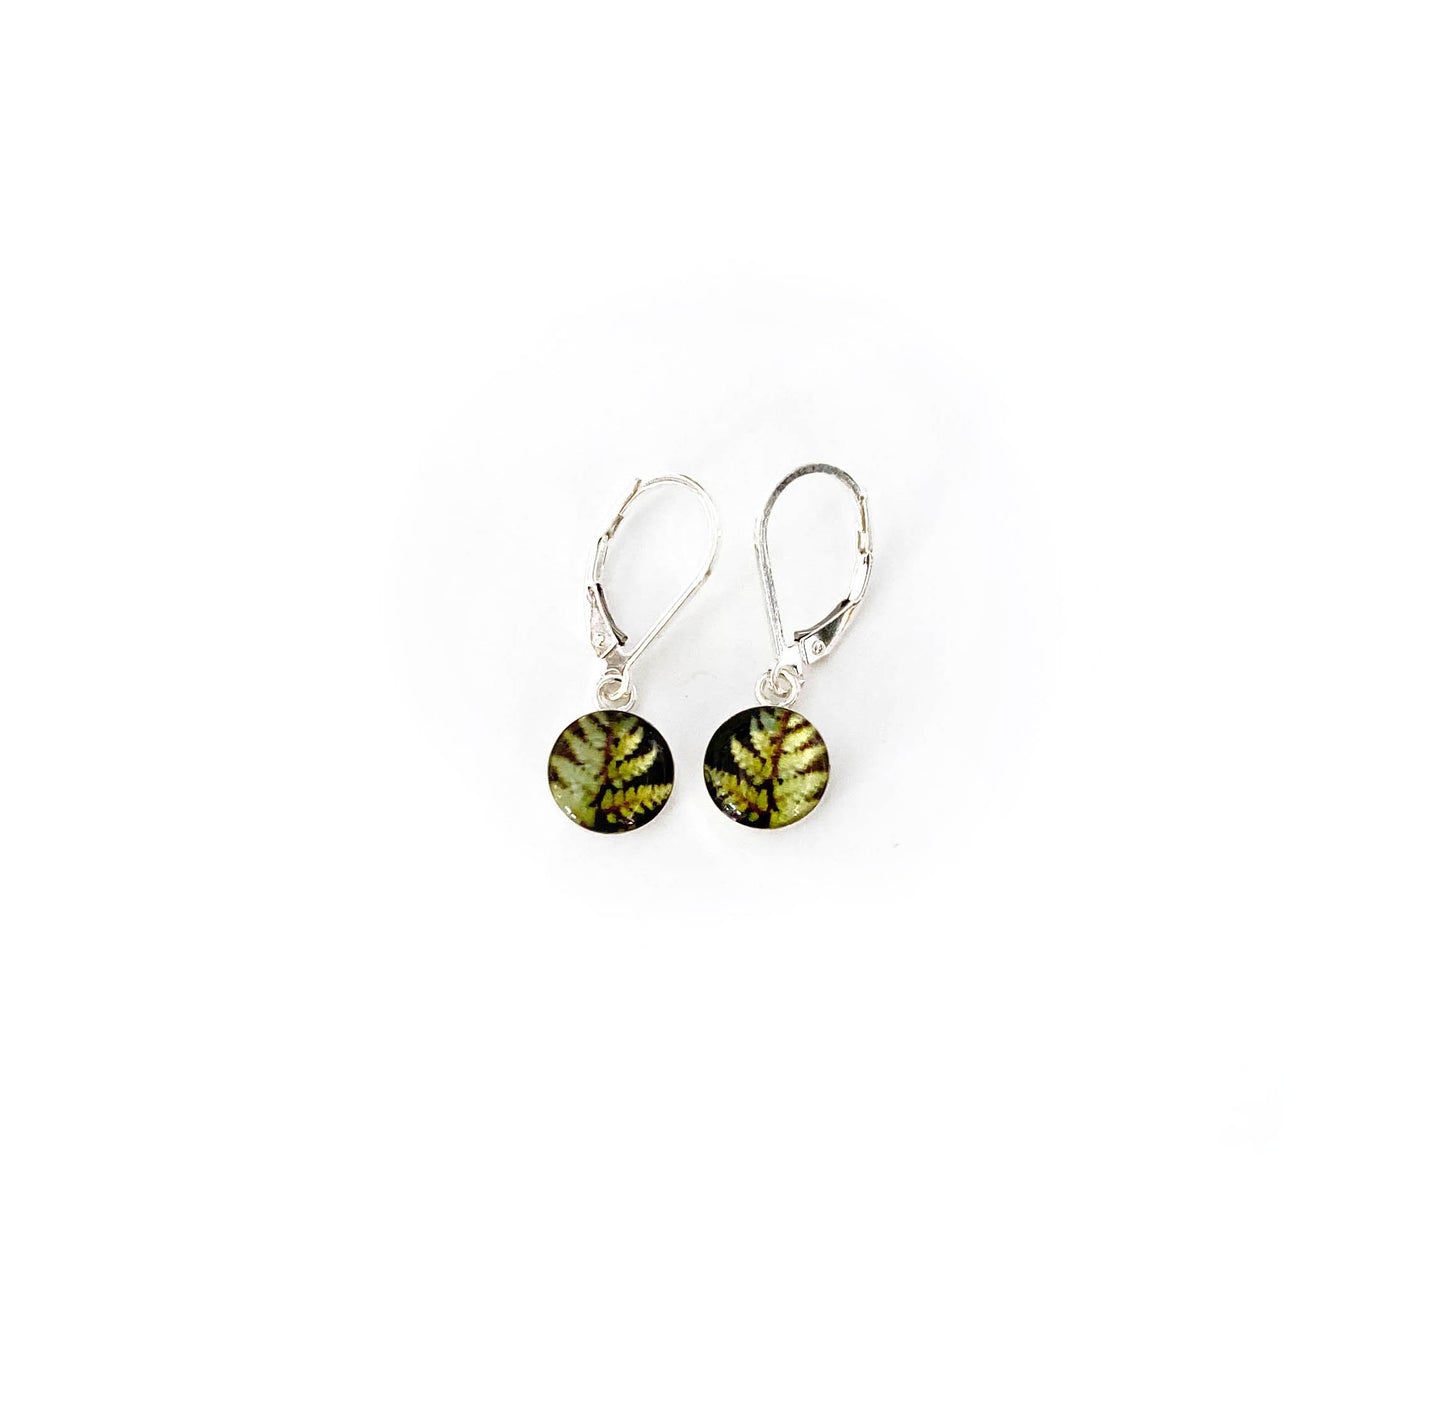 FERN- Tiny Round Earrings, Silver and Resin